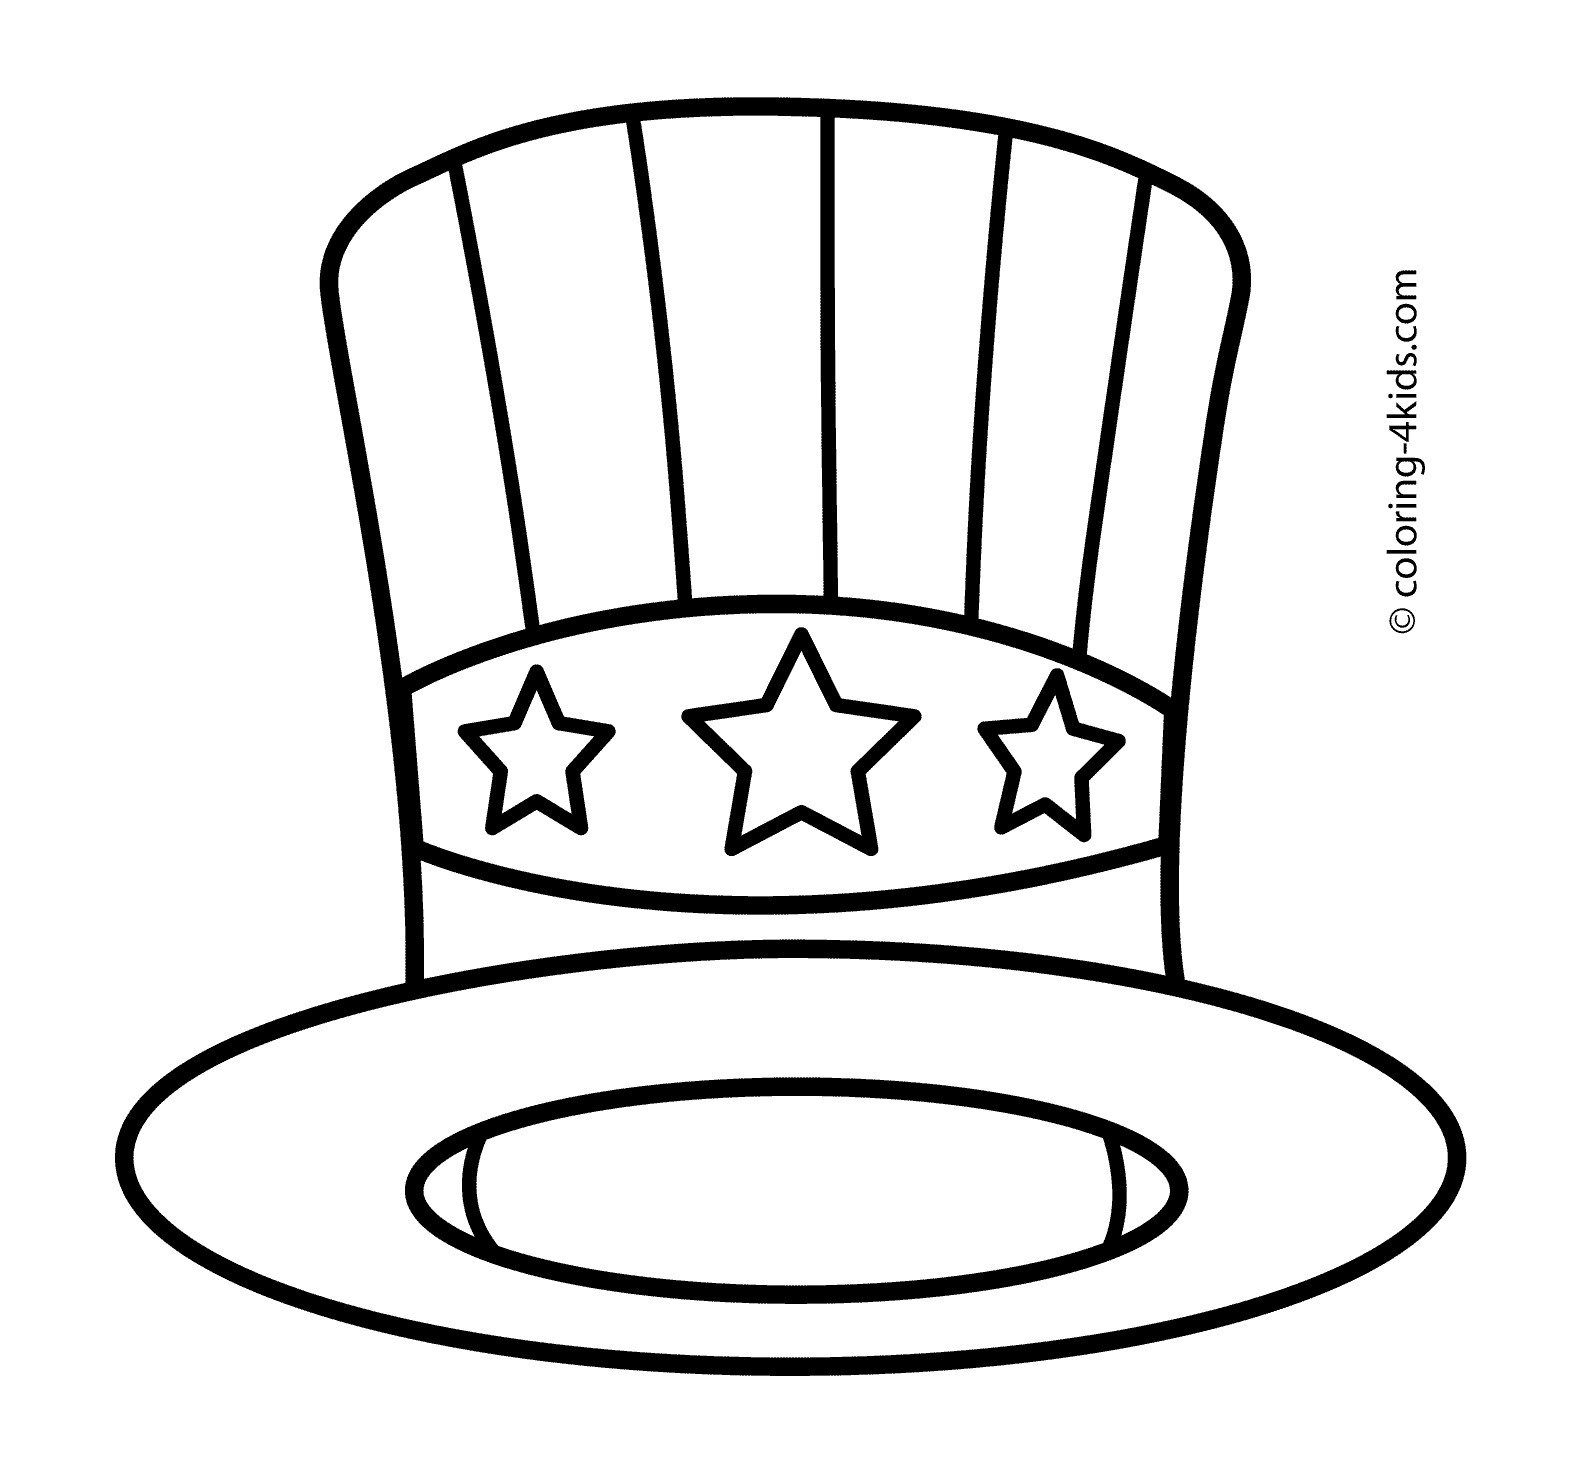 Coloring Pages For Boys Harts
 Drawn hat colouring page Pencil and in color drawn hat